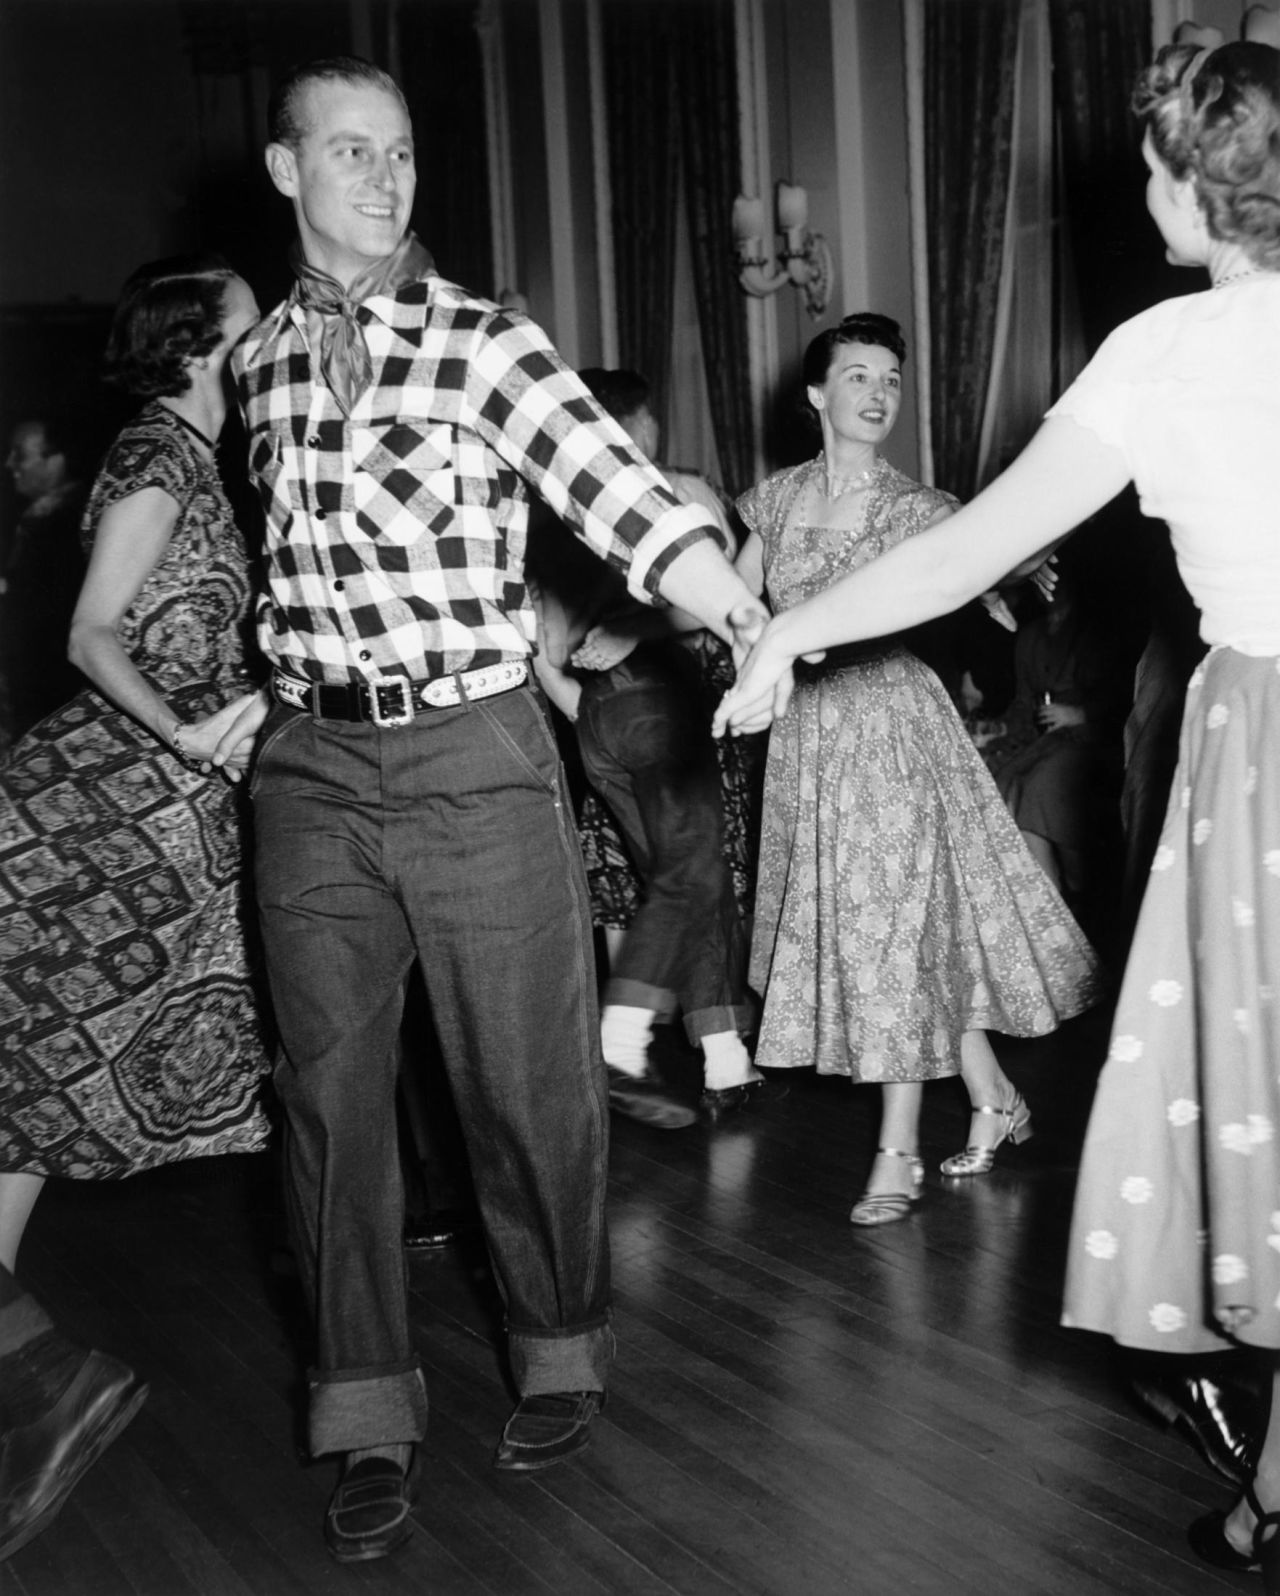 Prince Philip is pictured dancing at a traditional hoedown held in the honour of the Royal Couple at Rideau Hall, Ottawa, during a five-week visit of Canada in 1951. 